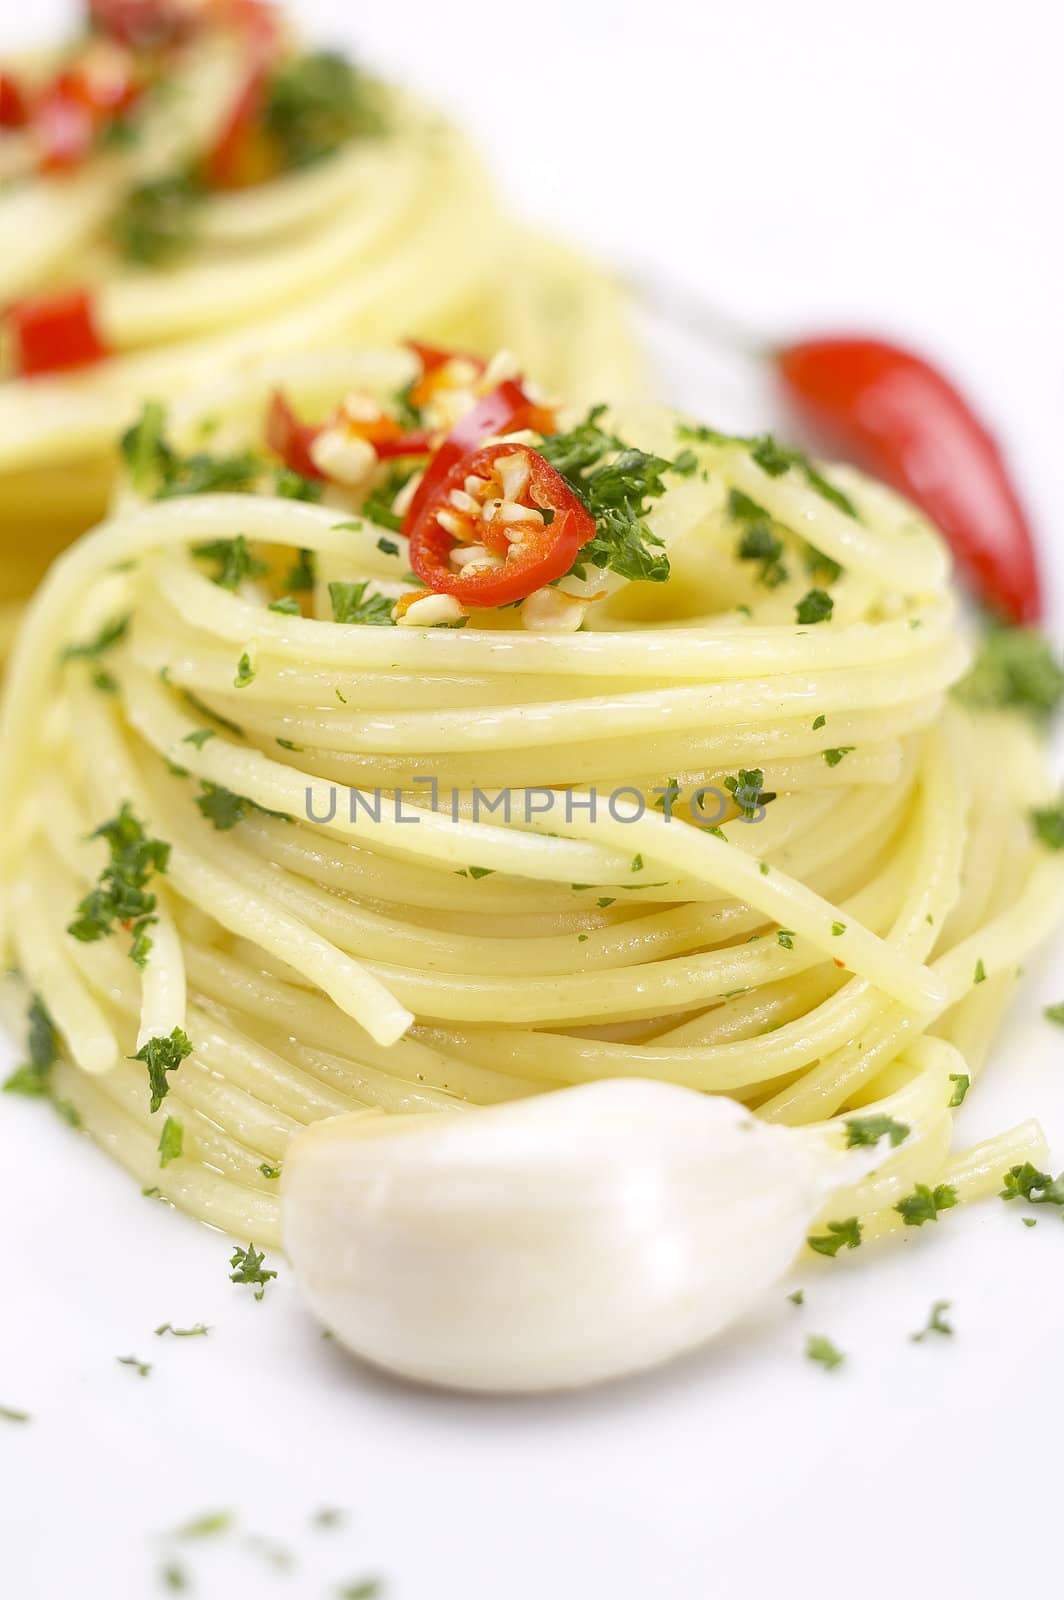 pasta garlic extra virgin olive oil and red chili pepper by keko64